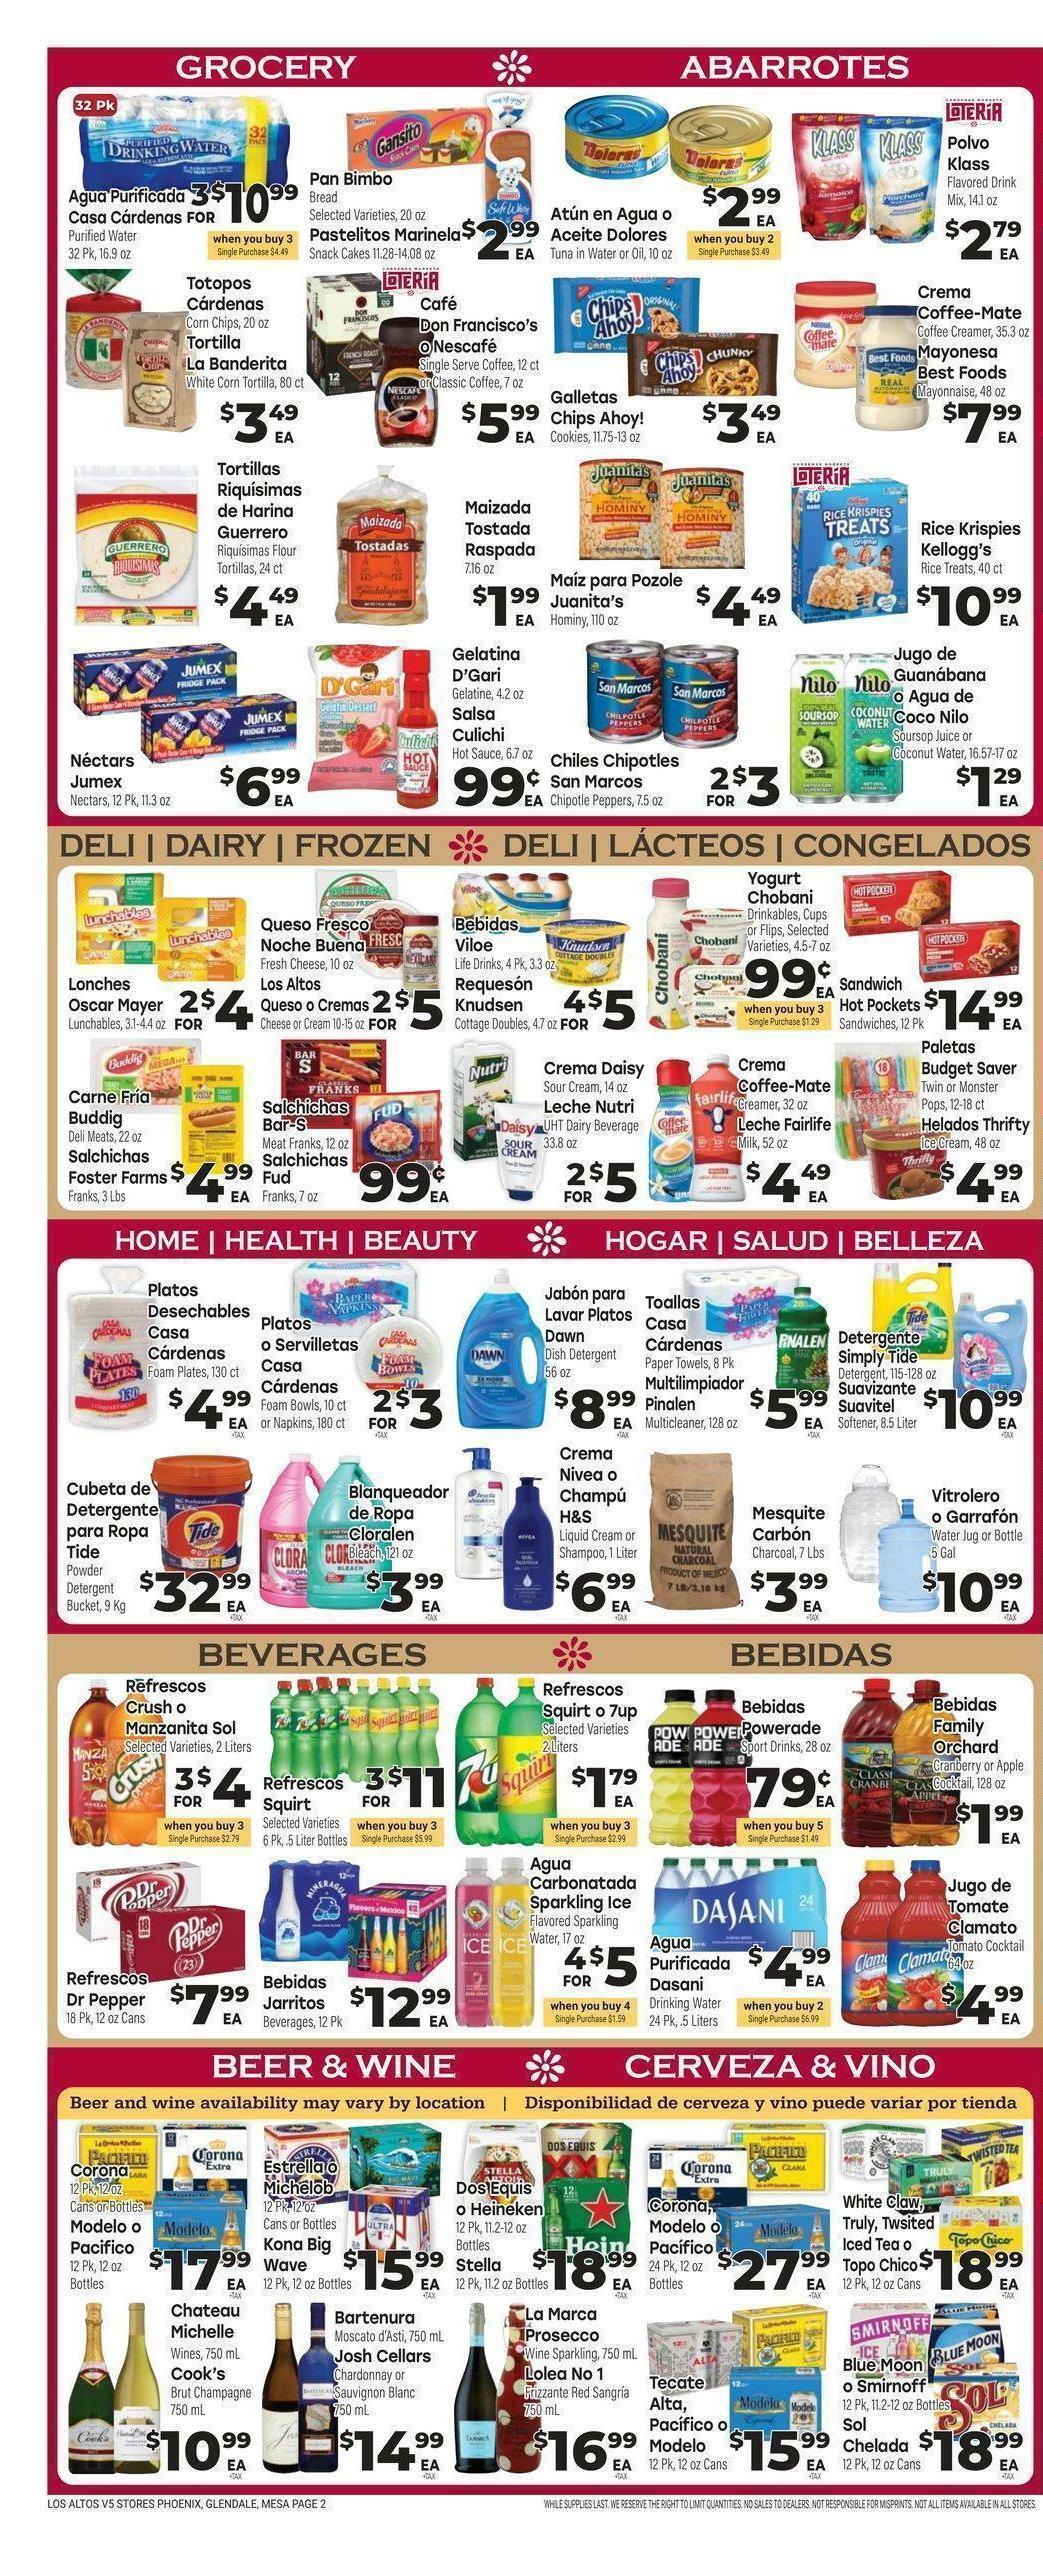 Cardenas Market Weekly Ad from May 31